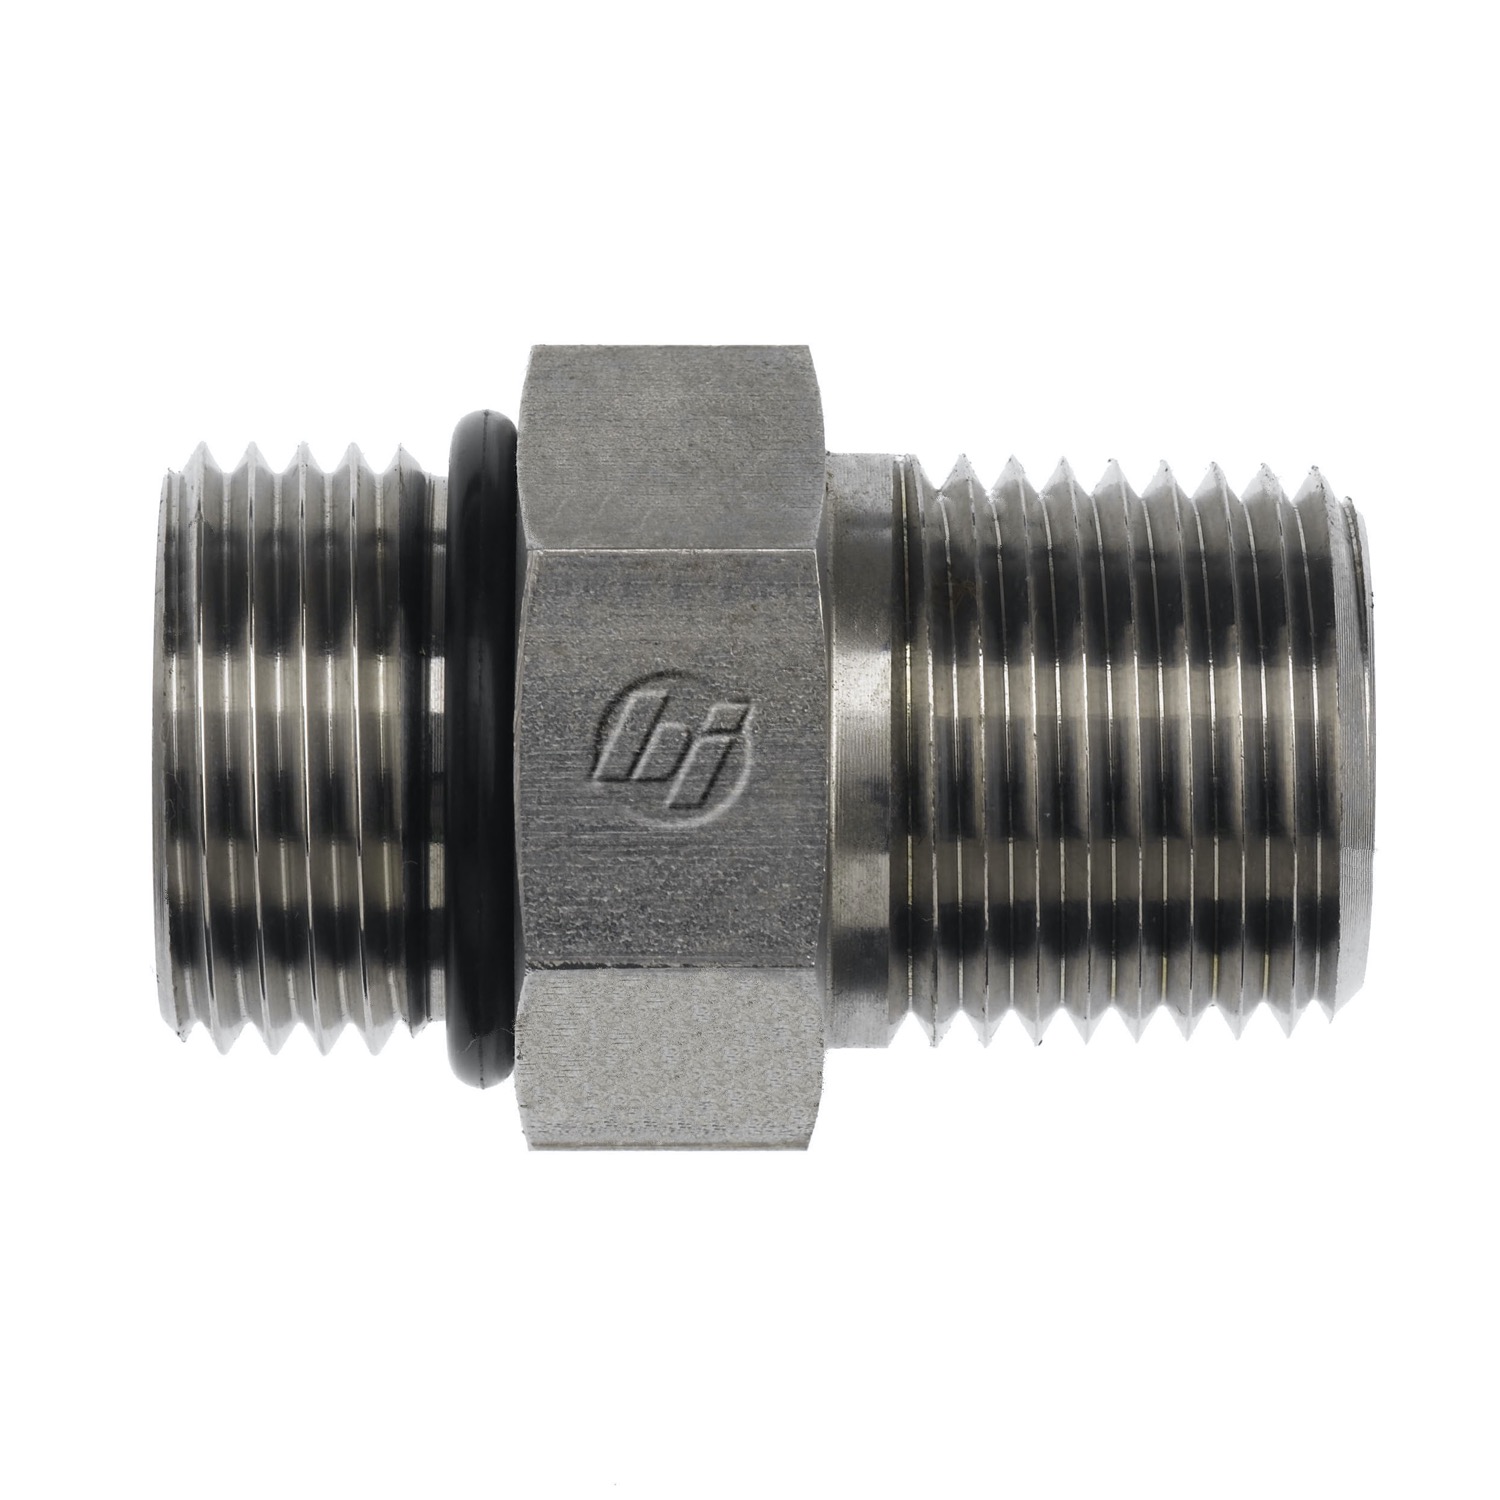 Hydraulic Hose Adapters - Straight Fitting, O-Ring Boss to NPTF, 6401 Series 6401-10-12-O